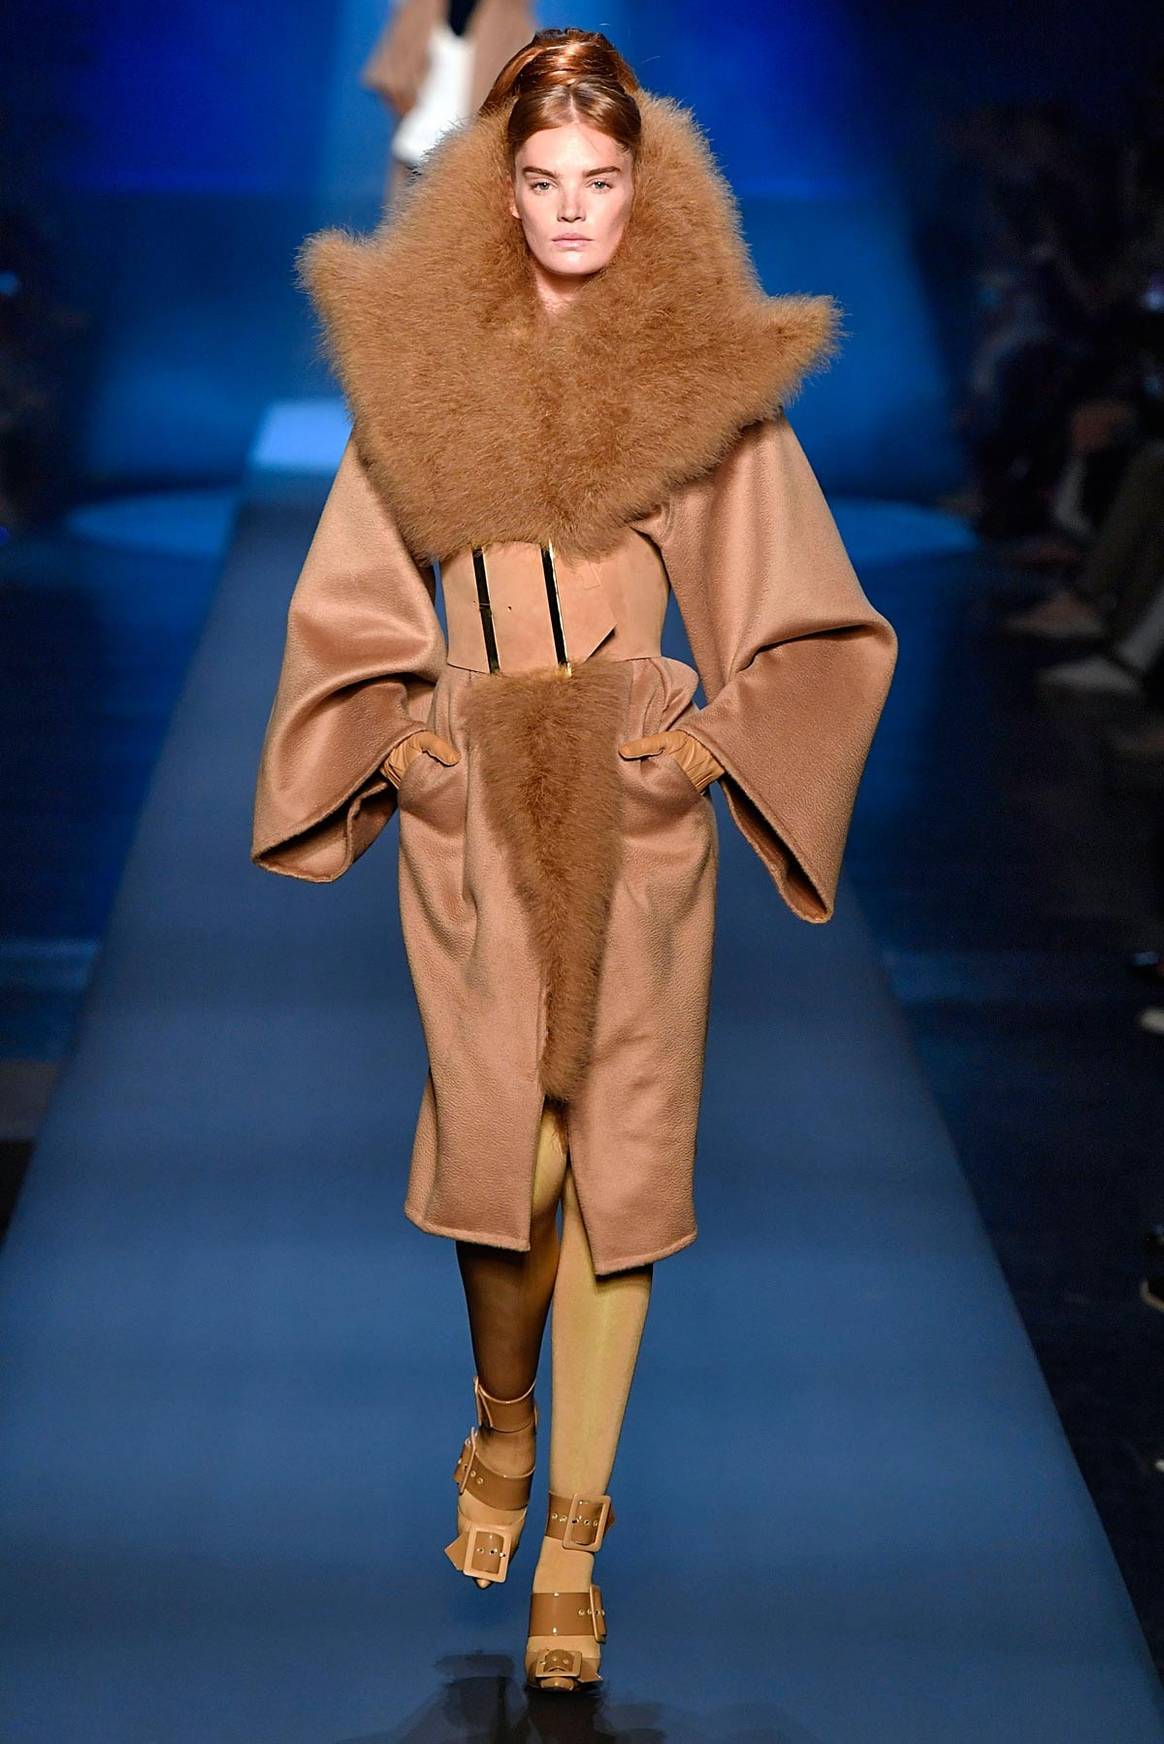 Fashion icon Jean Paul Gaultier says he could go back on fur ban